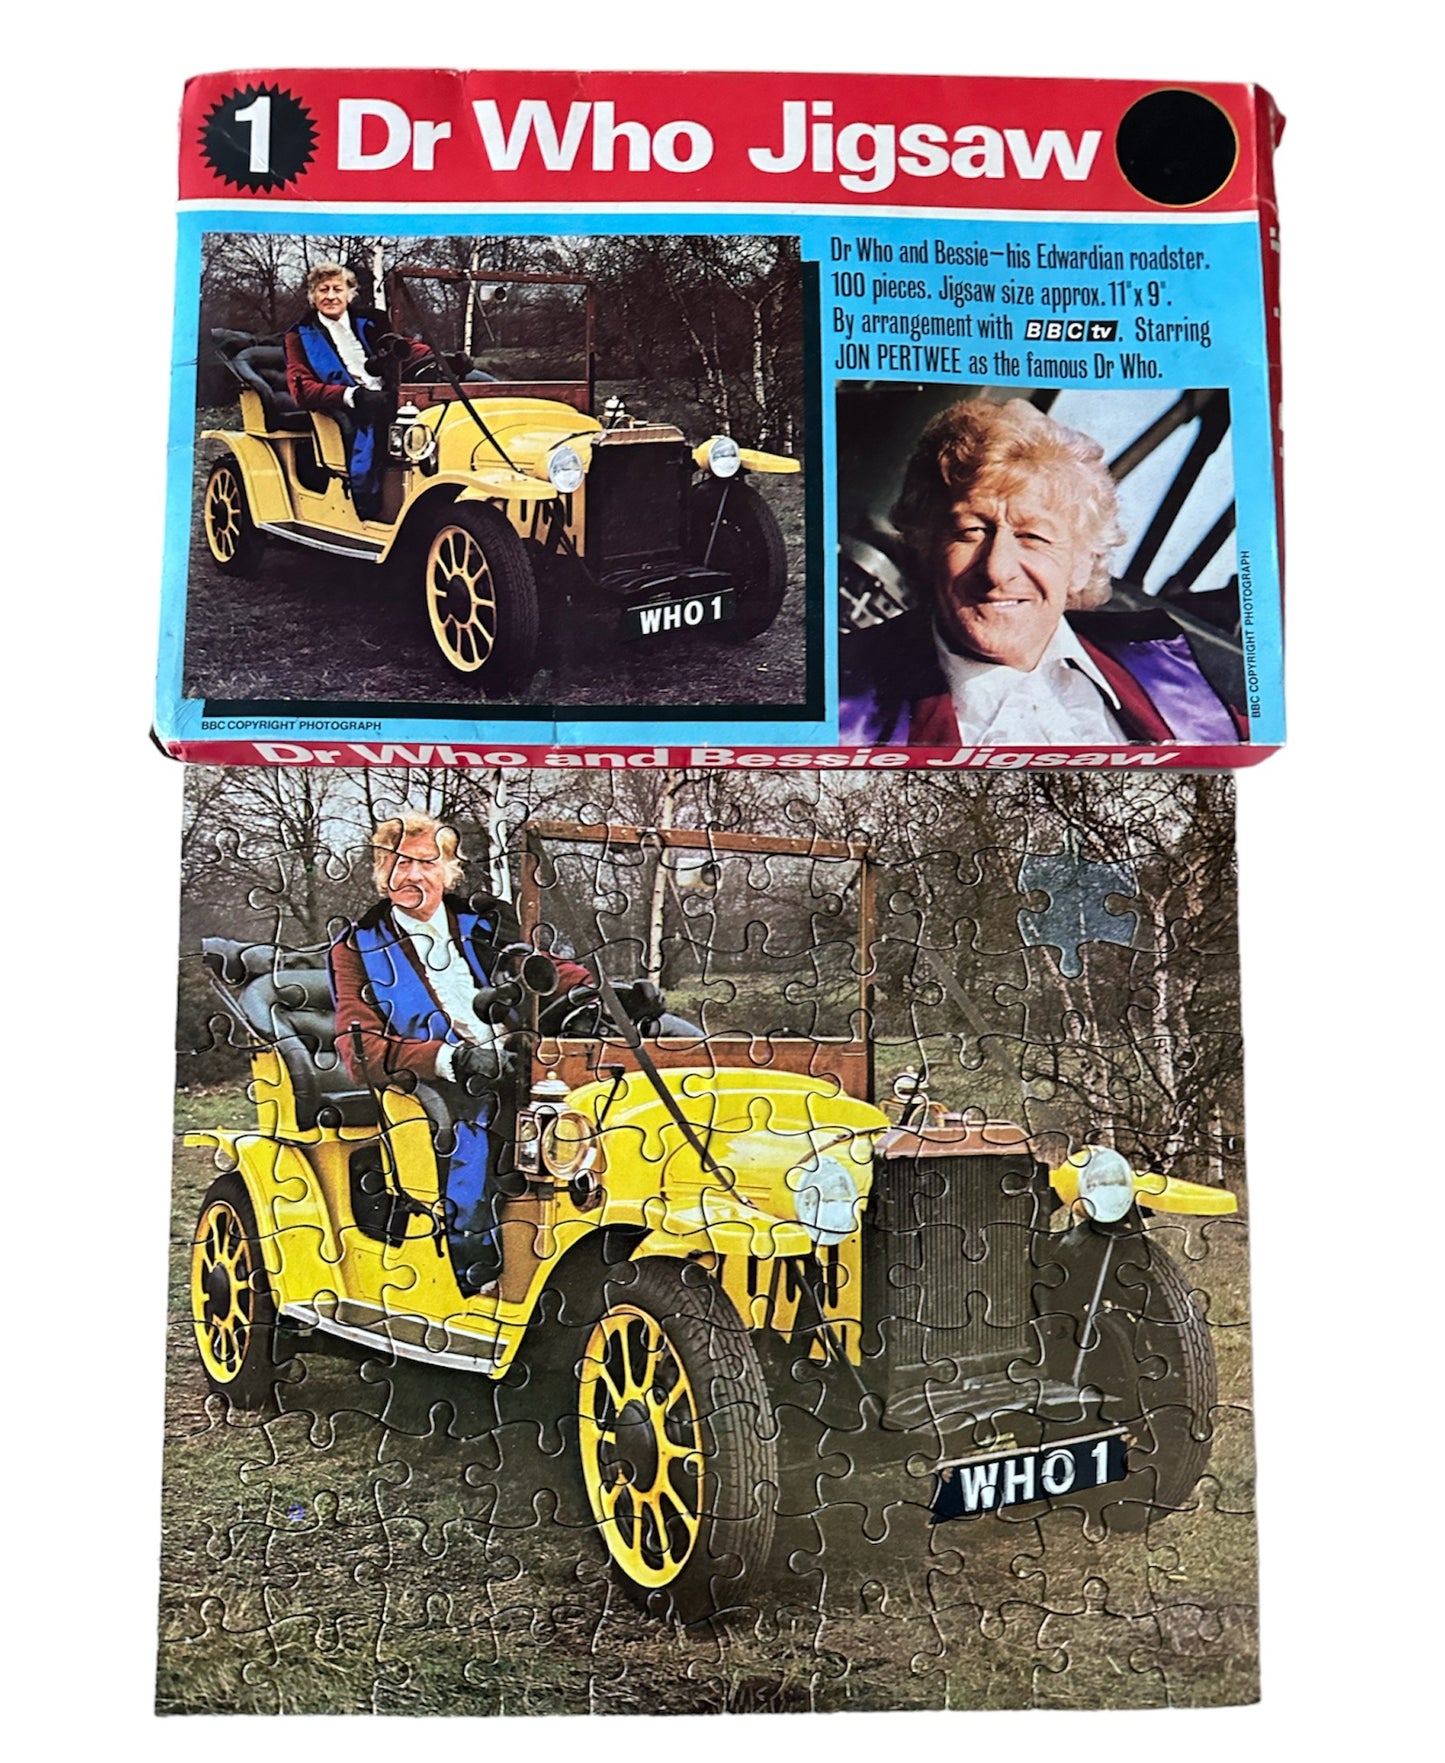 Vintage 1972 Dr Who 100 Piece Fully Interlocking Jigsaw Puzzle Featuring Jon Pertwee in The Doctor And Bessie Jigsaw No. 1 - Complete In The Original Box.